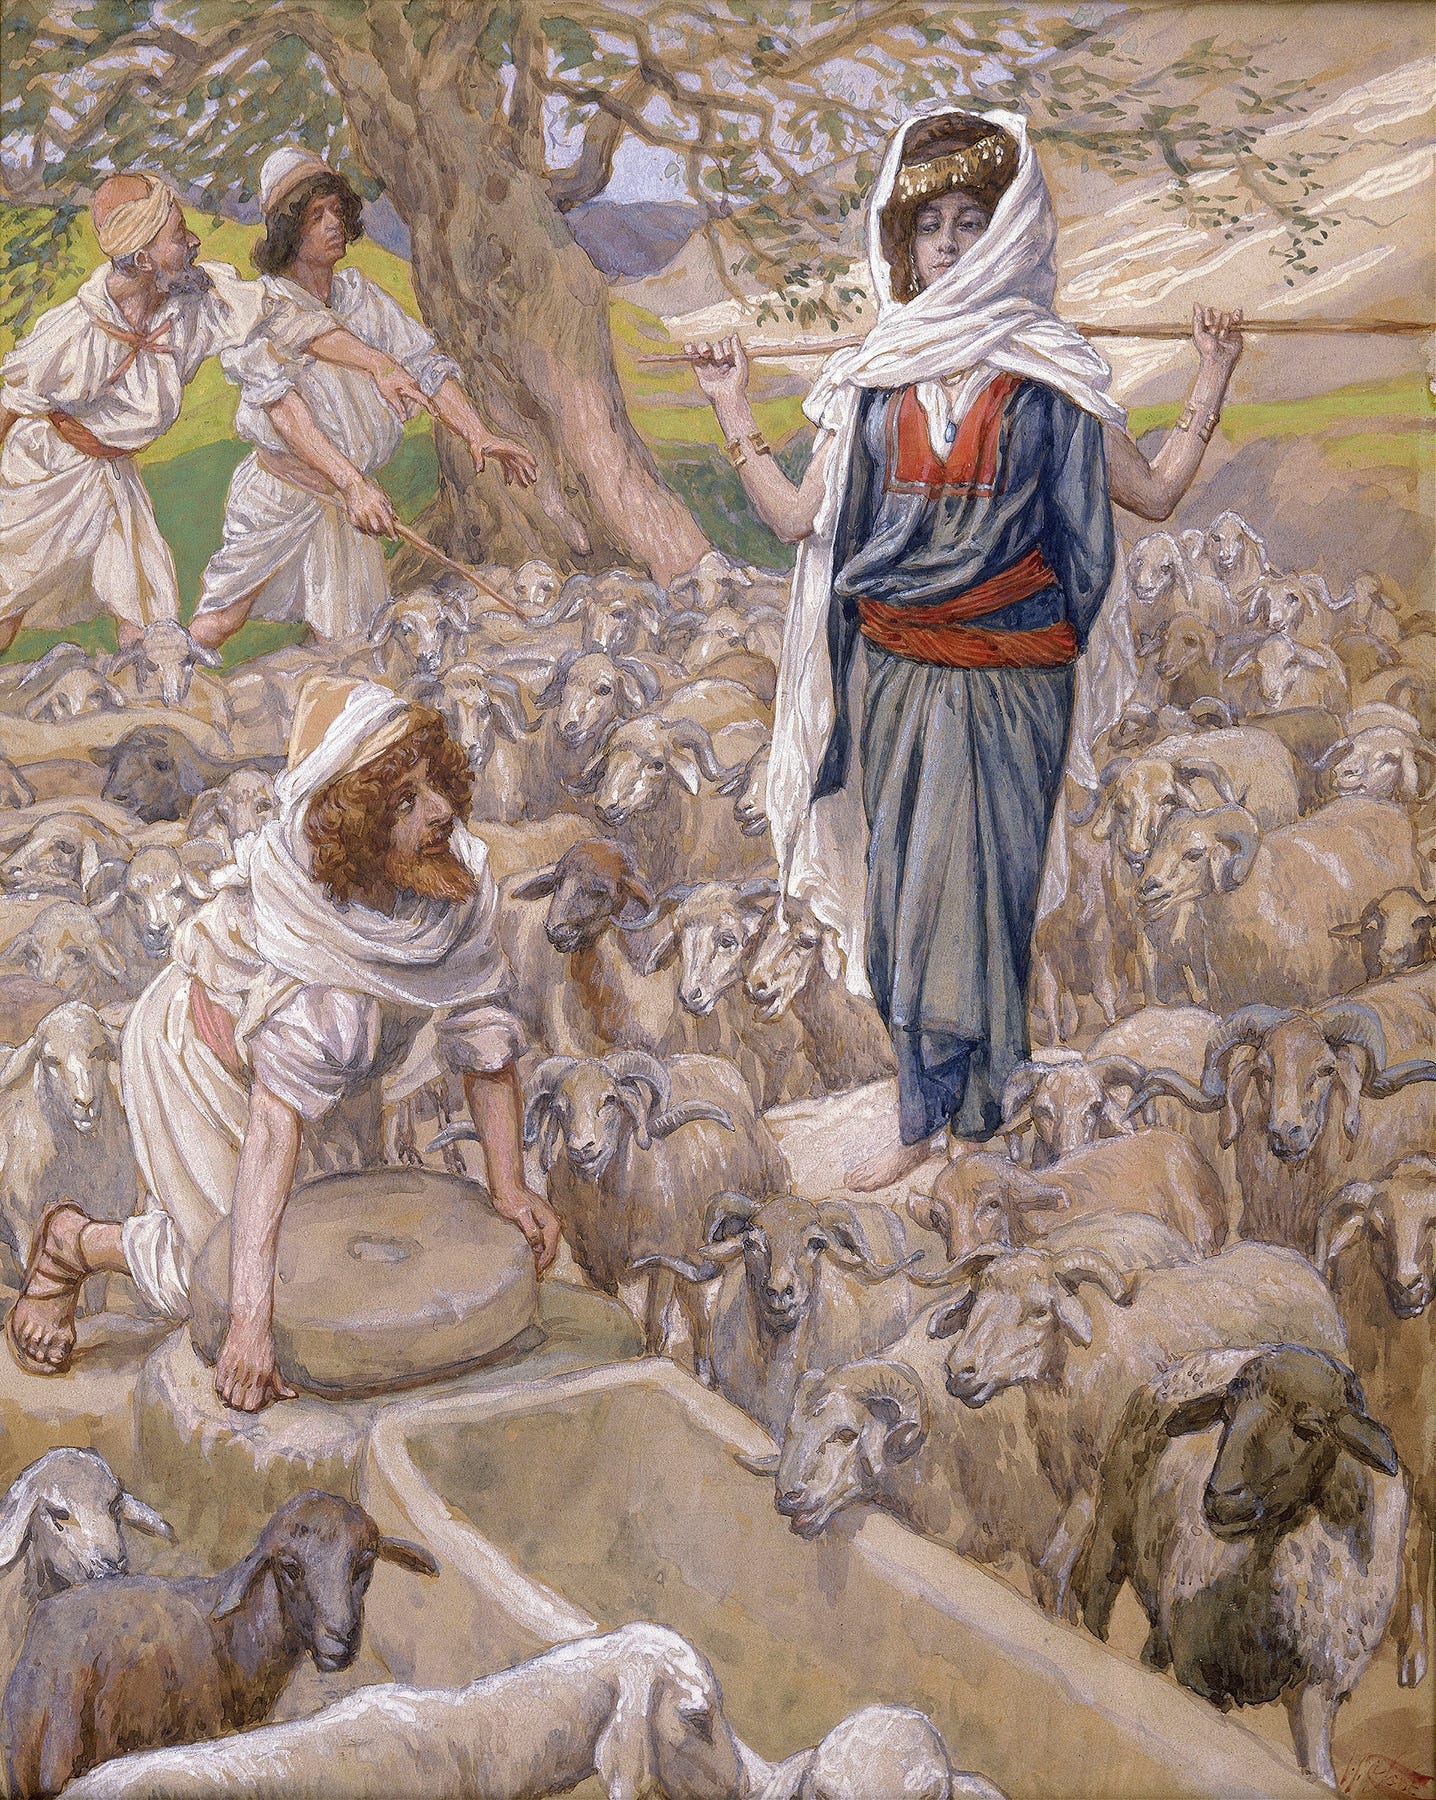 Jacob and Rachel at the Well (c. 1896-1902) by James Tissot